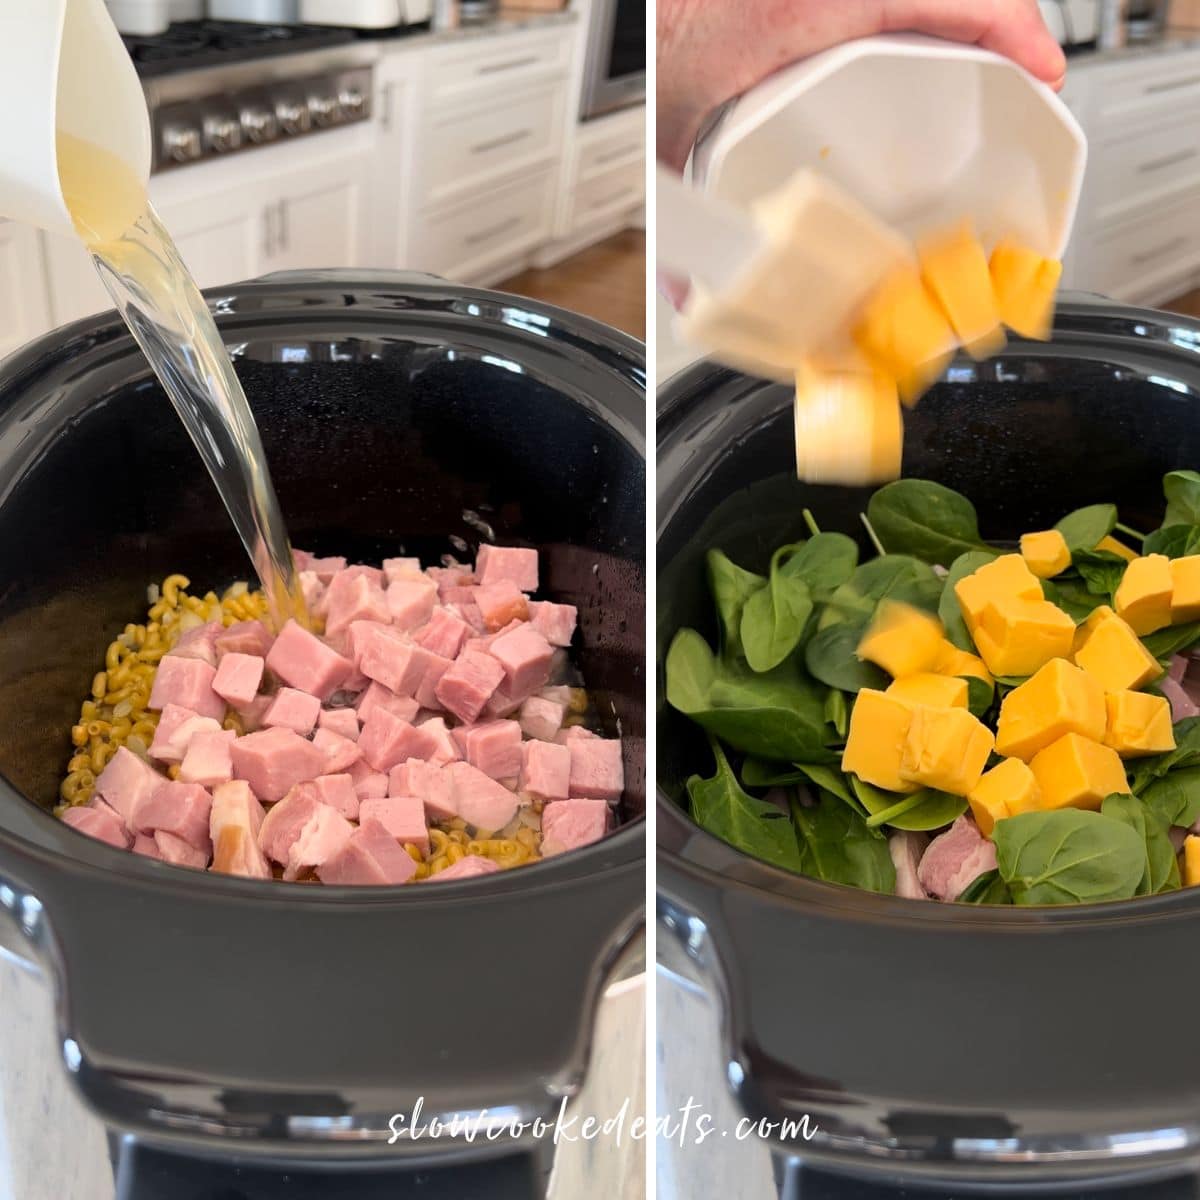 Adding the pasta, broth, ham, cheese, and spinach to the crock pot to cook.